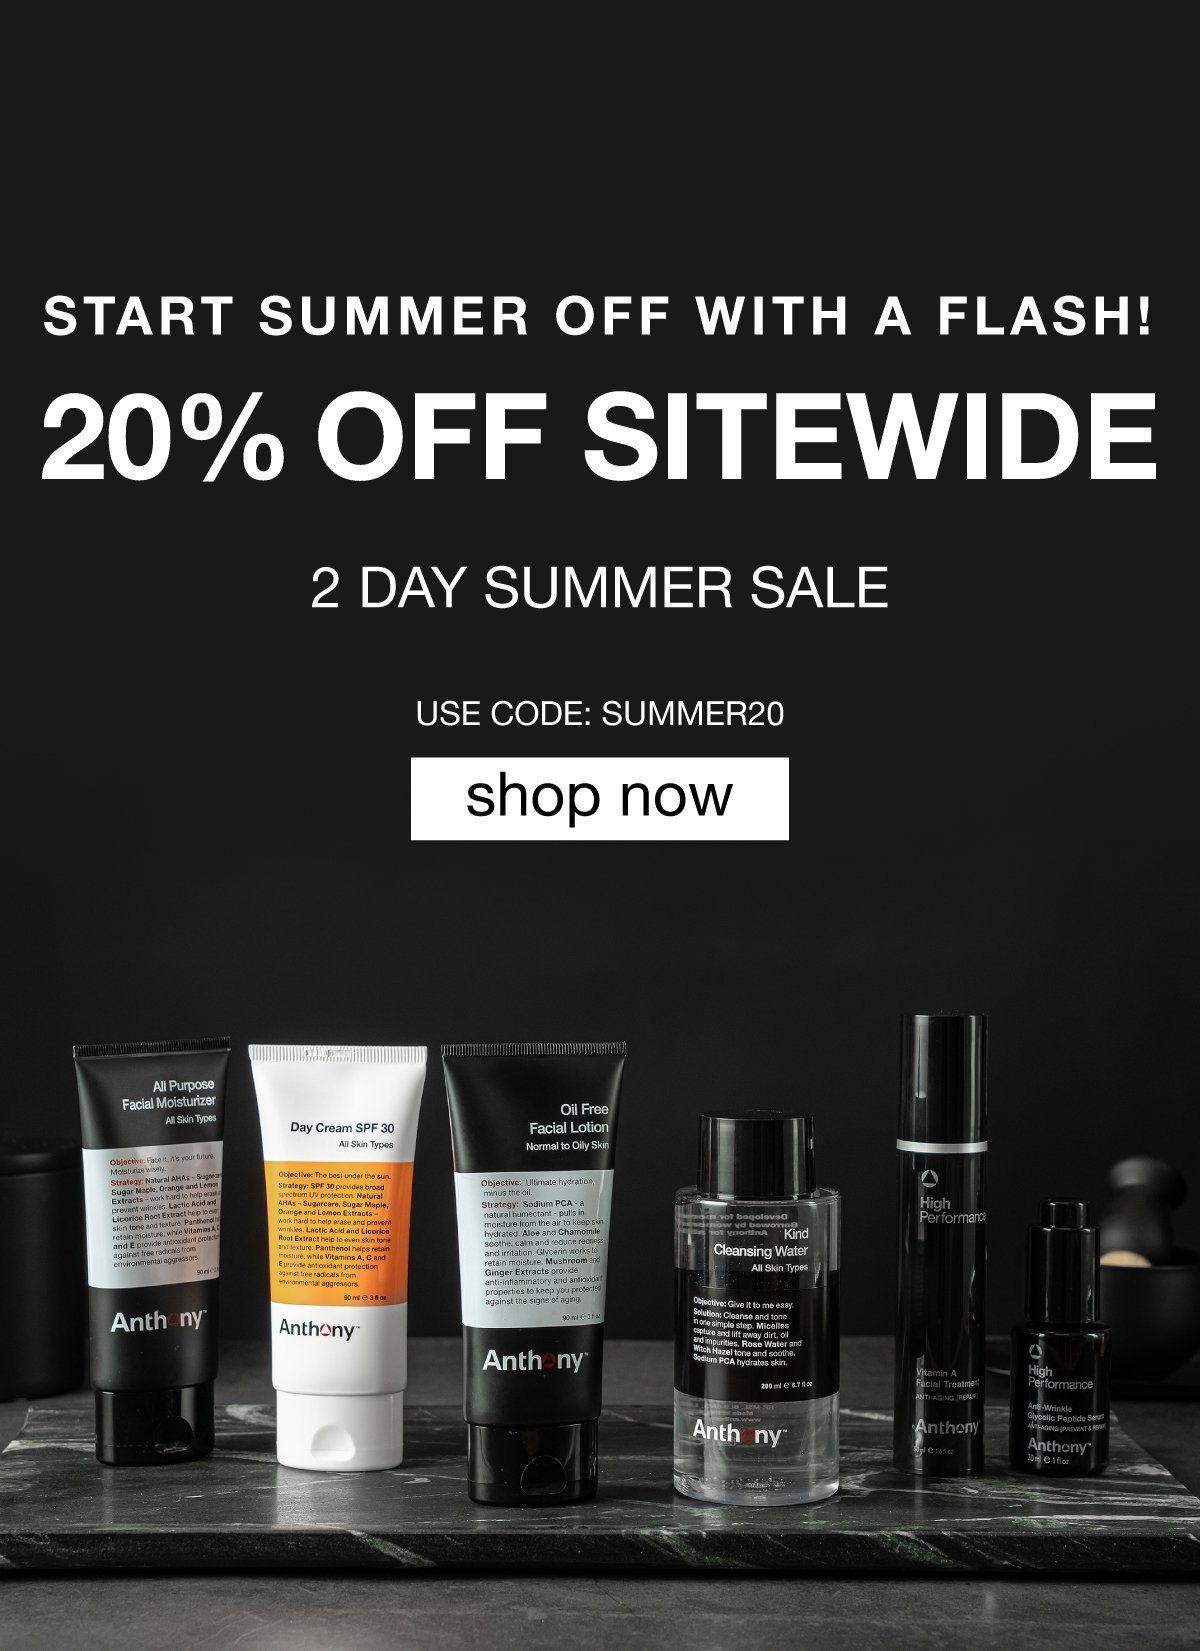 Start summer off with a FLASH! 20% off sitewide!